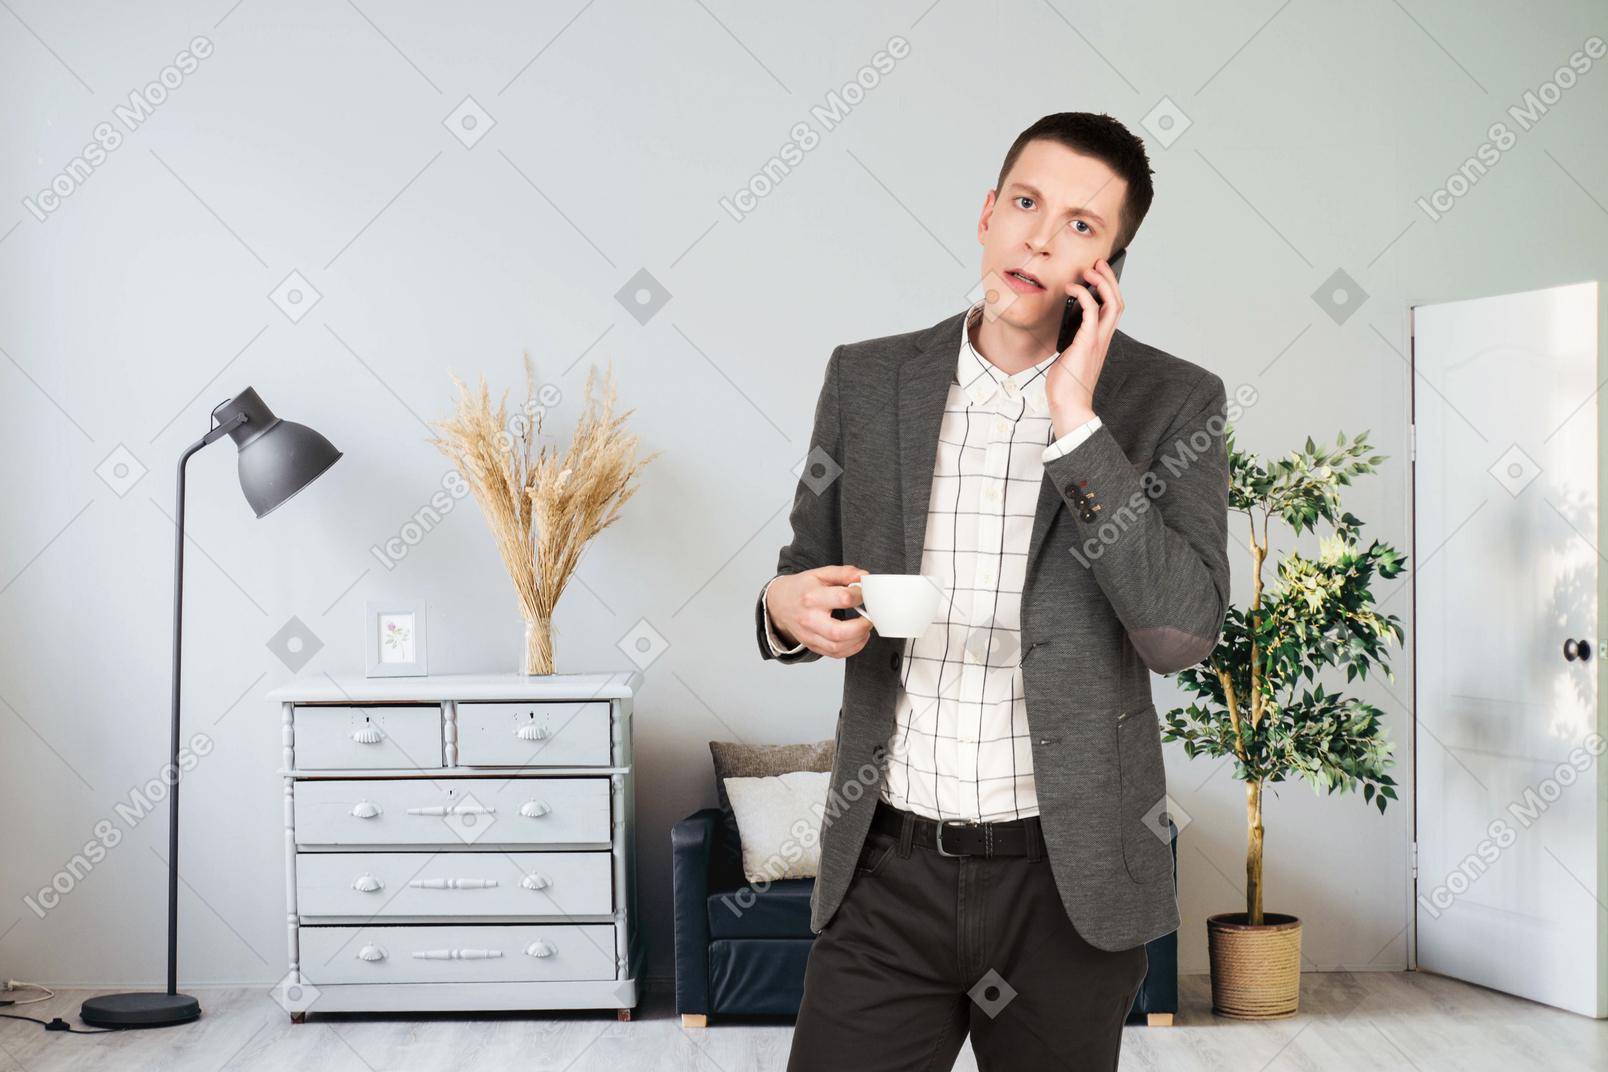 Man drinking coffee and talking on the phone